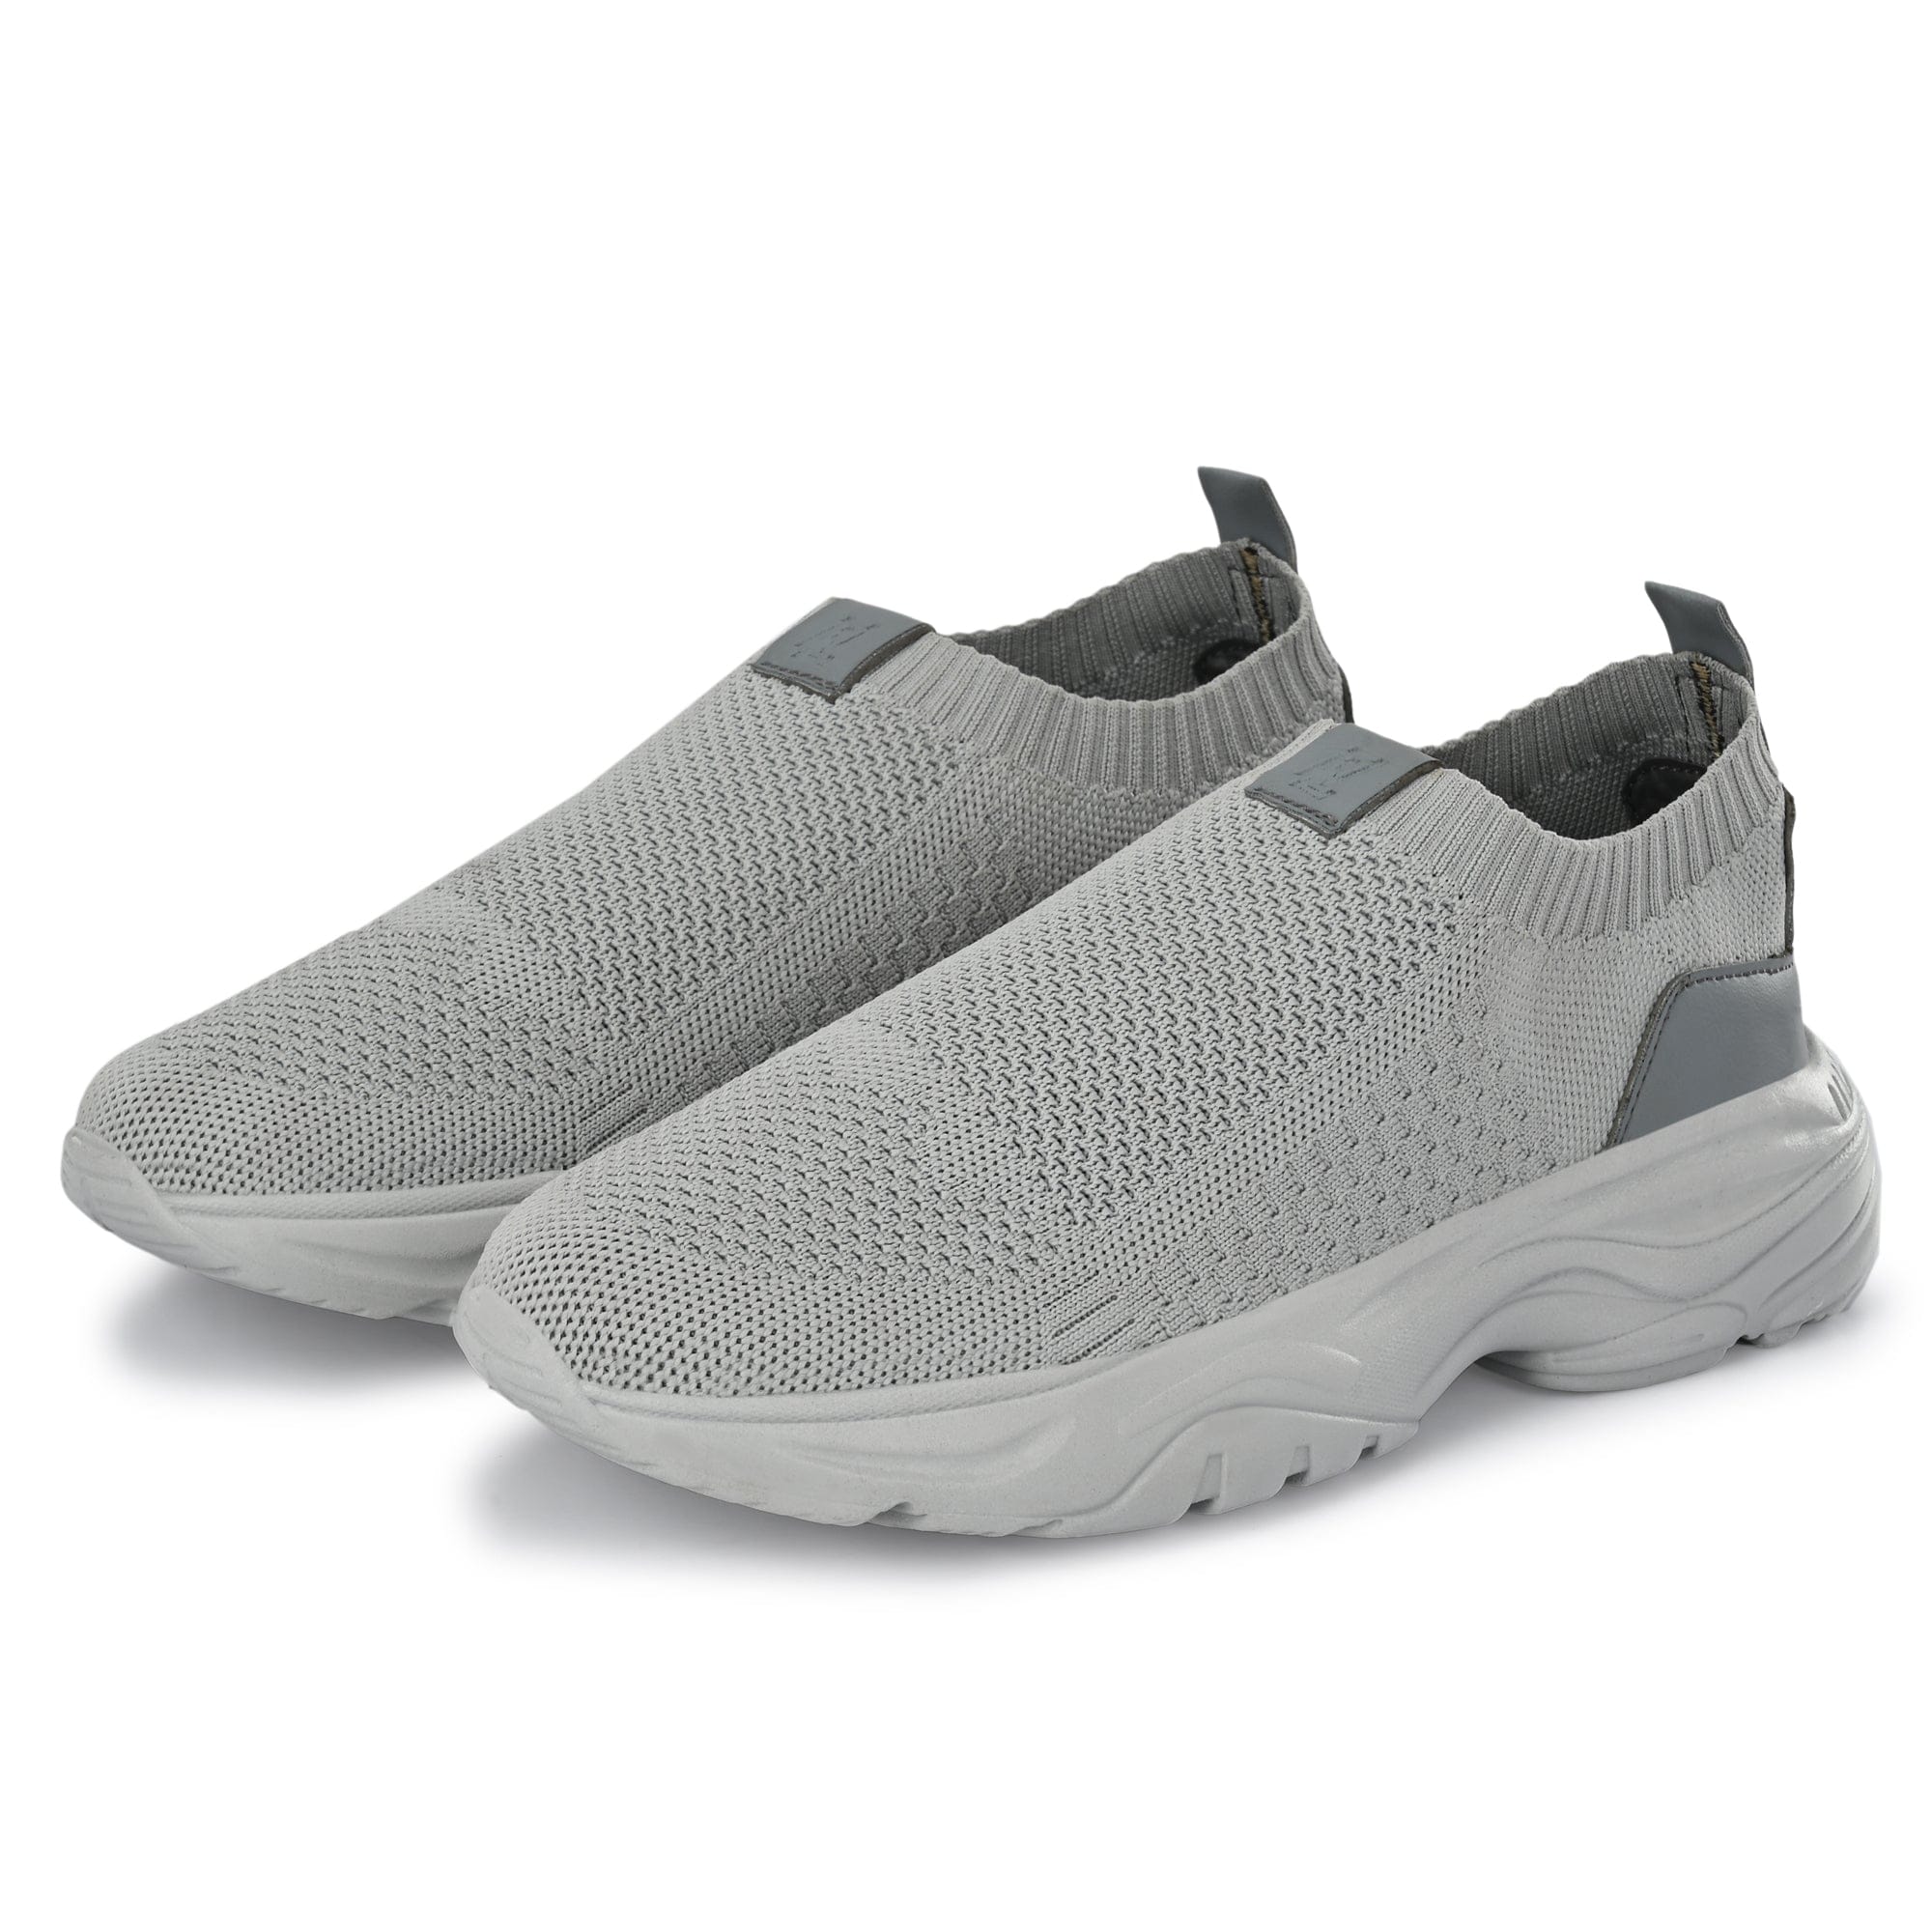 Legwork Ultra Triple Grey Comfortable ProKnit Sneakers Shoes made with 100% Recycled Plastic Bottles